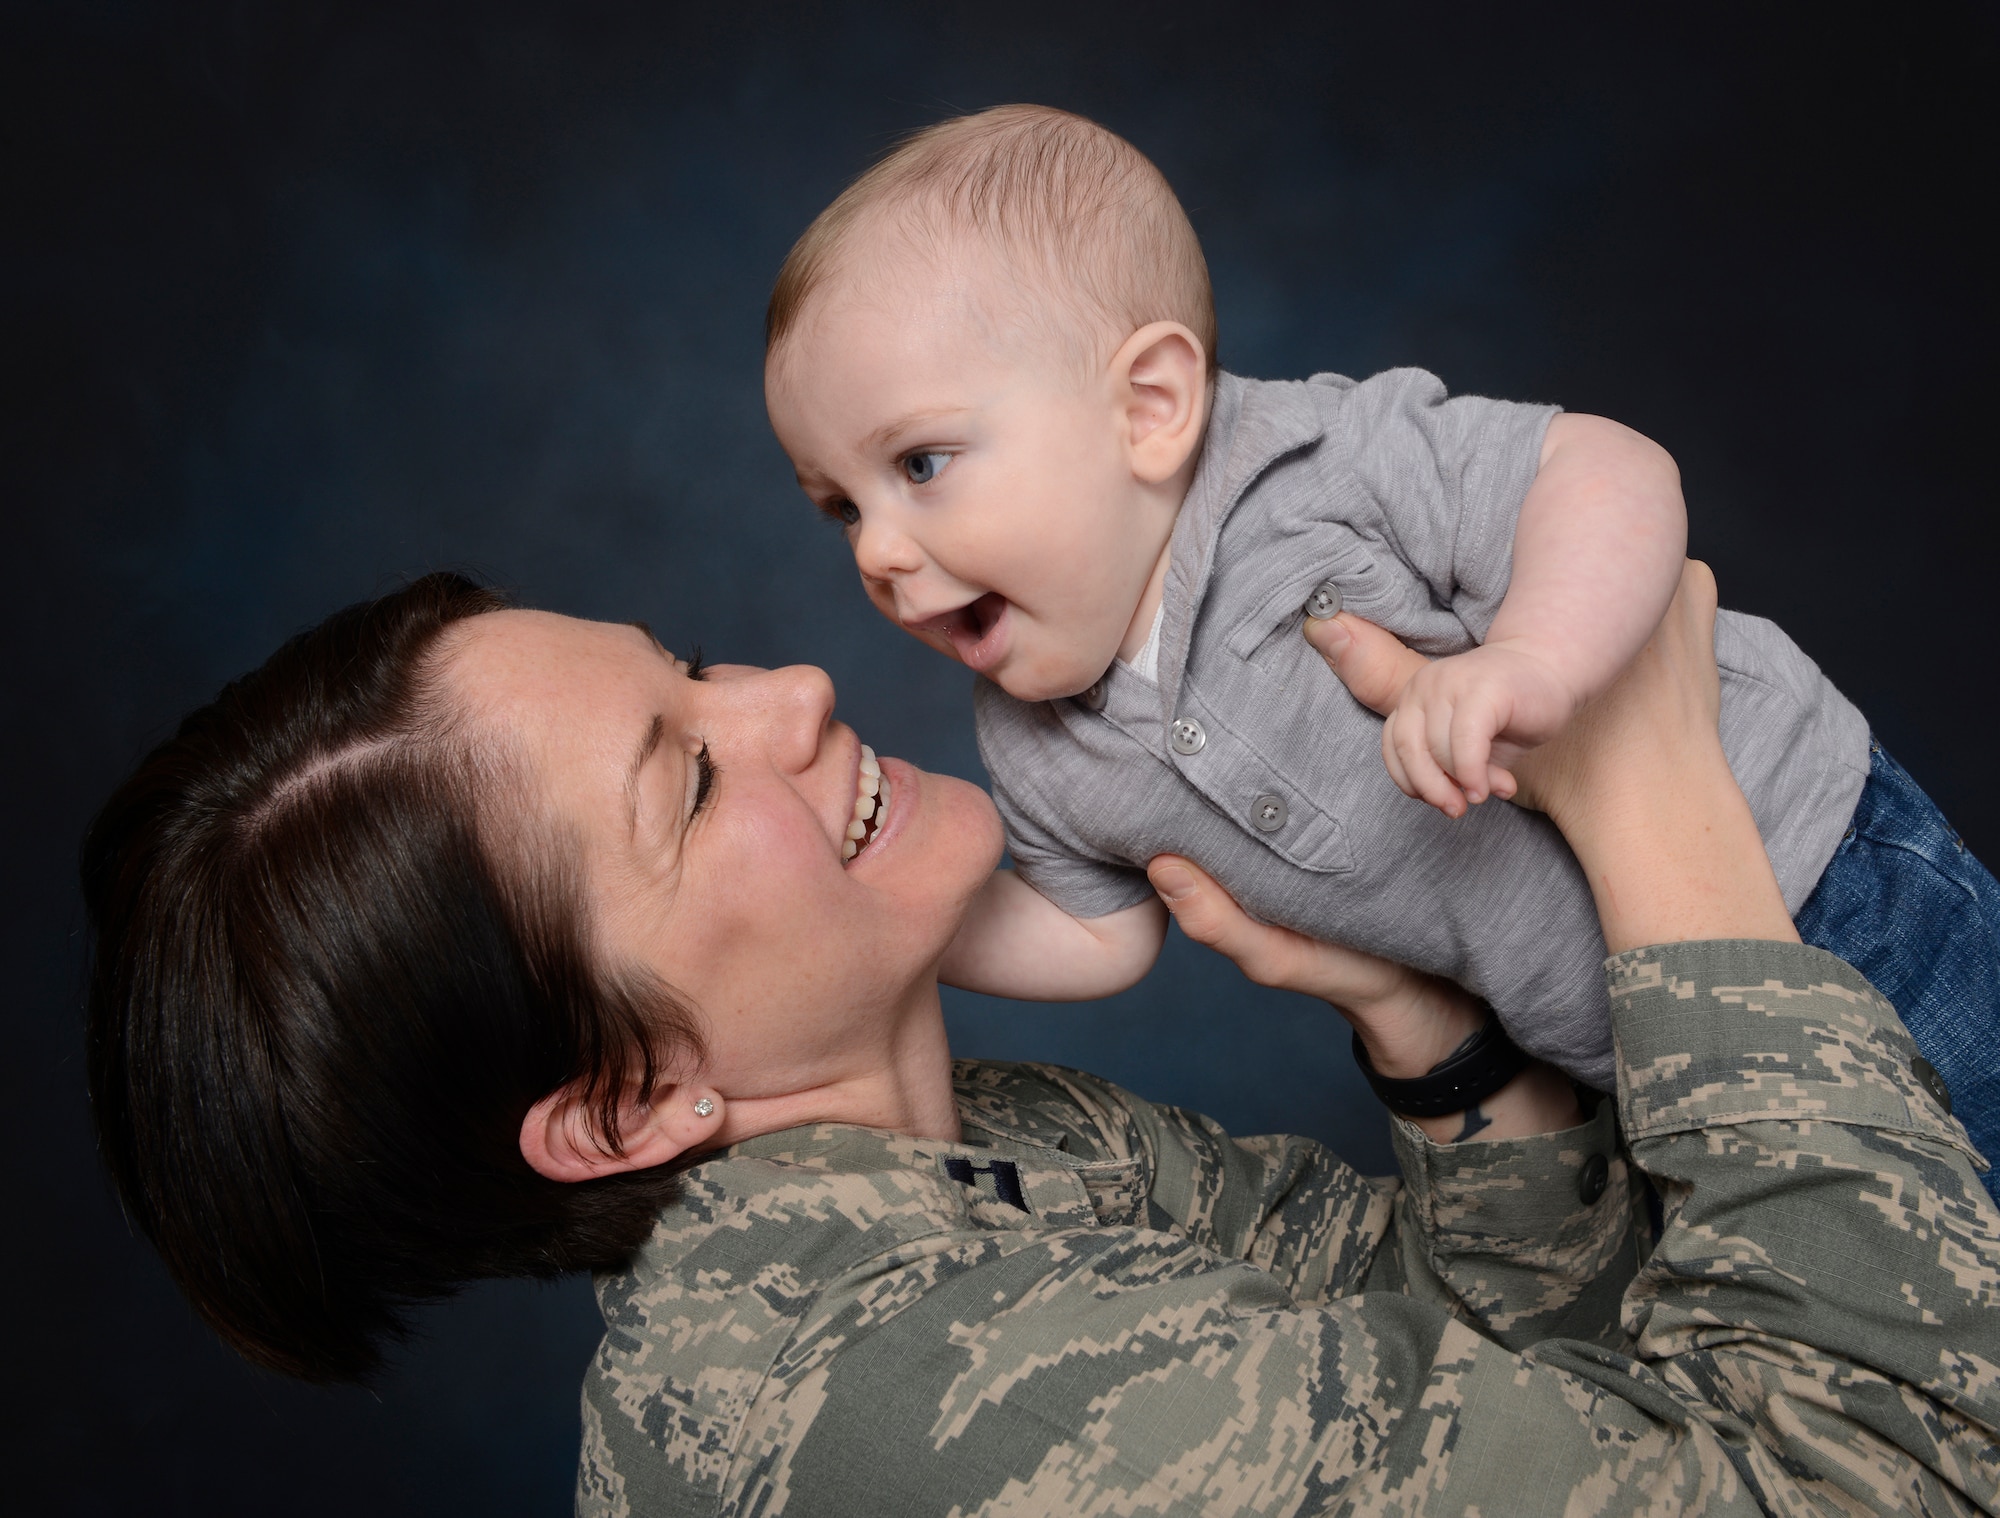 Capt. Morgan McNabb, 341st Medical Operations Squadron family advocacy officer, poses with son, Dominic. Air Force Instruction 44-102, “Medical Care Management,” was revised in 2012 to include a breast-feeding policy recommending arrangement of work schedules that allow 15-30 minute breaks, every three to four hours in an area providing adequate privacy and cleanliness, excluding restrooms. (U.S. Air Force photo/Beau Wade)